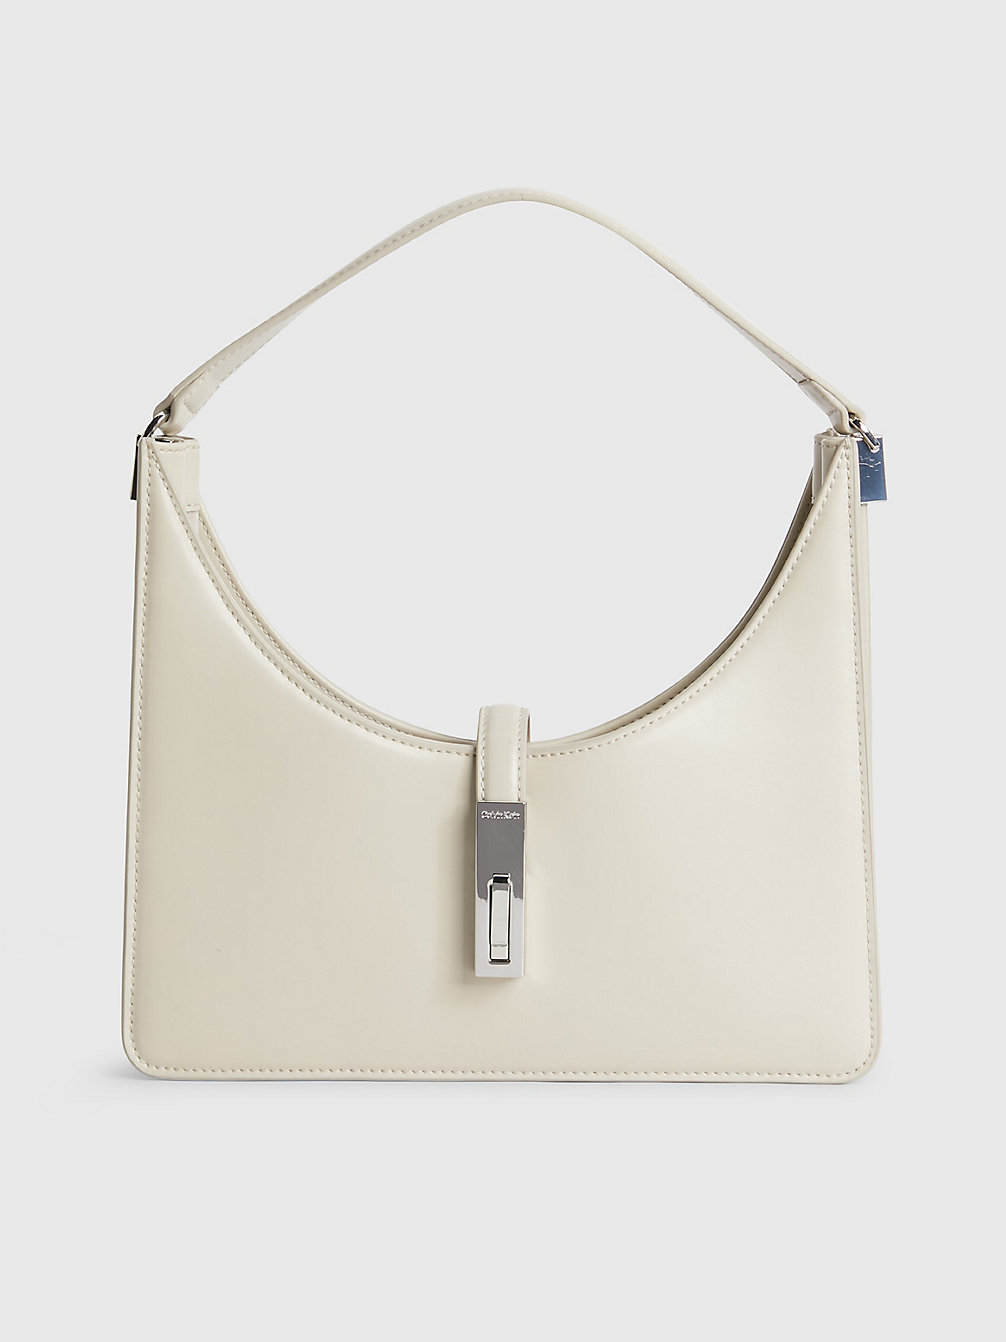 STONEY BEIGE Small Recycled Shoulder Bag undefined women Calvin Klein